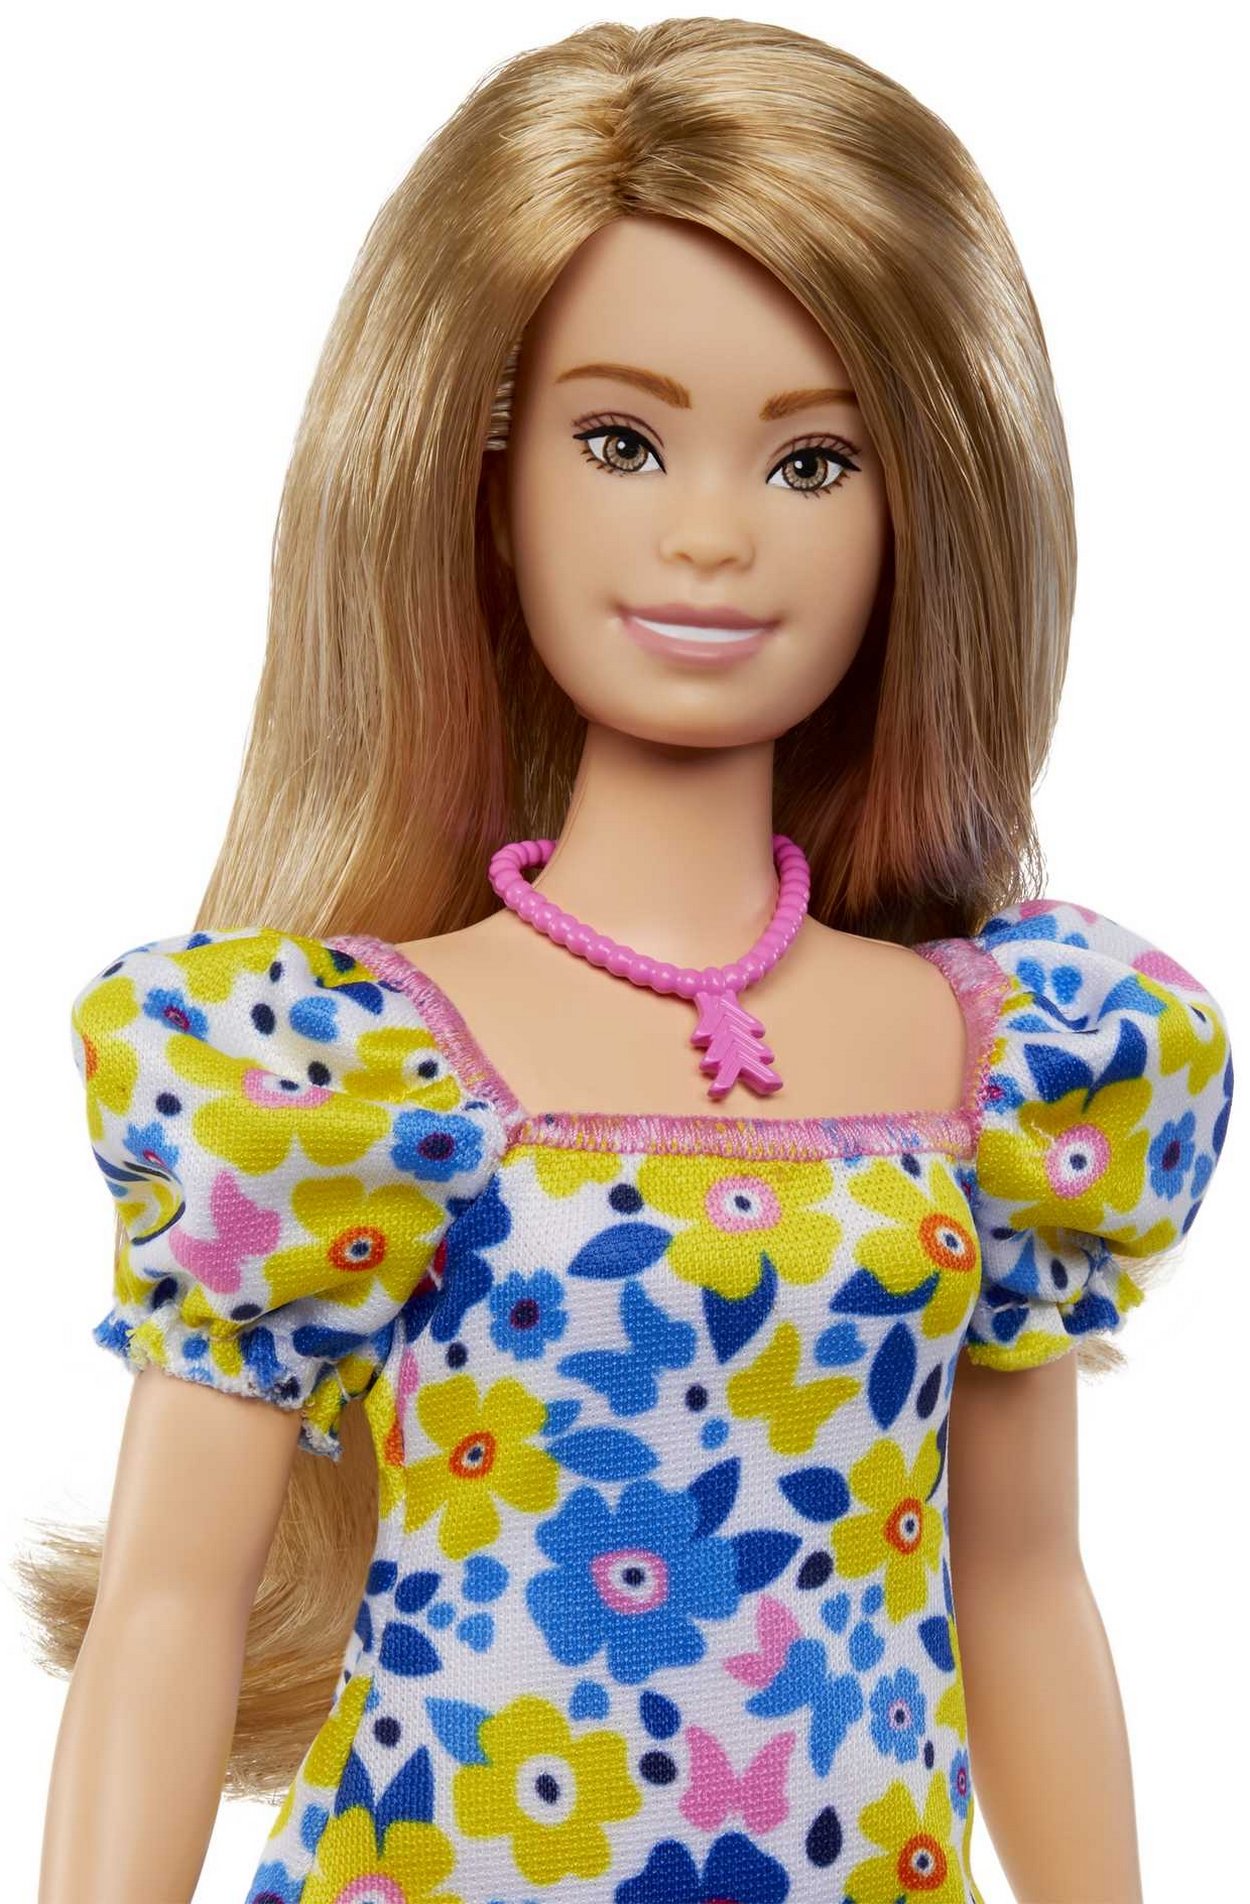 1673625495-youloveit-com-barbie-fashionistas-2023-down-sindrome-doll